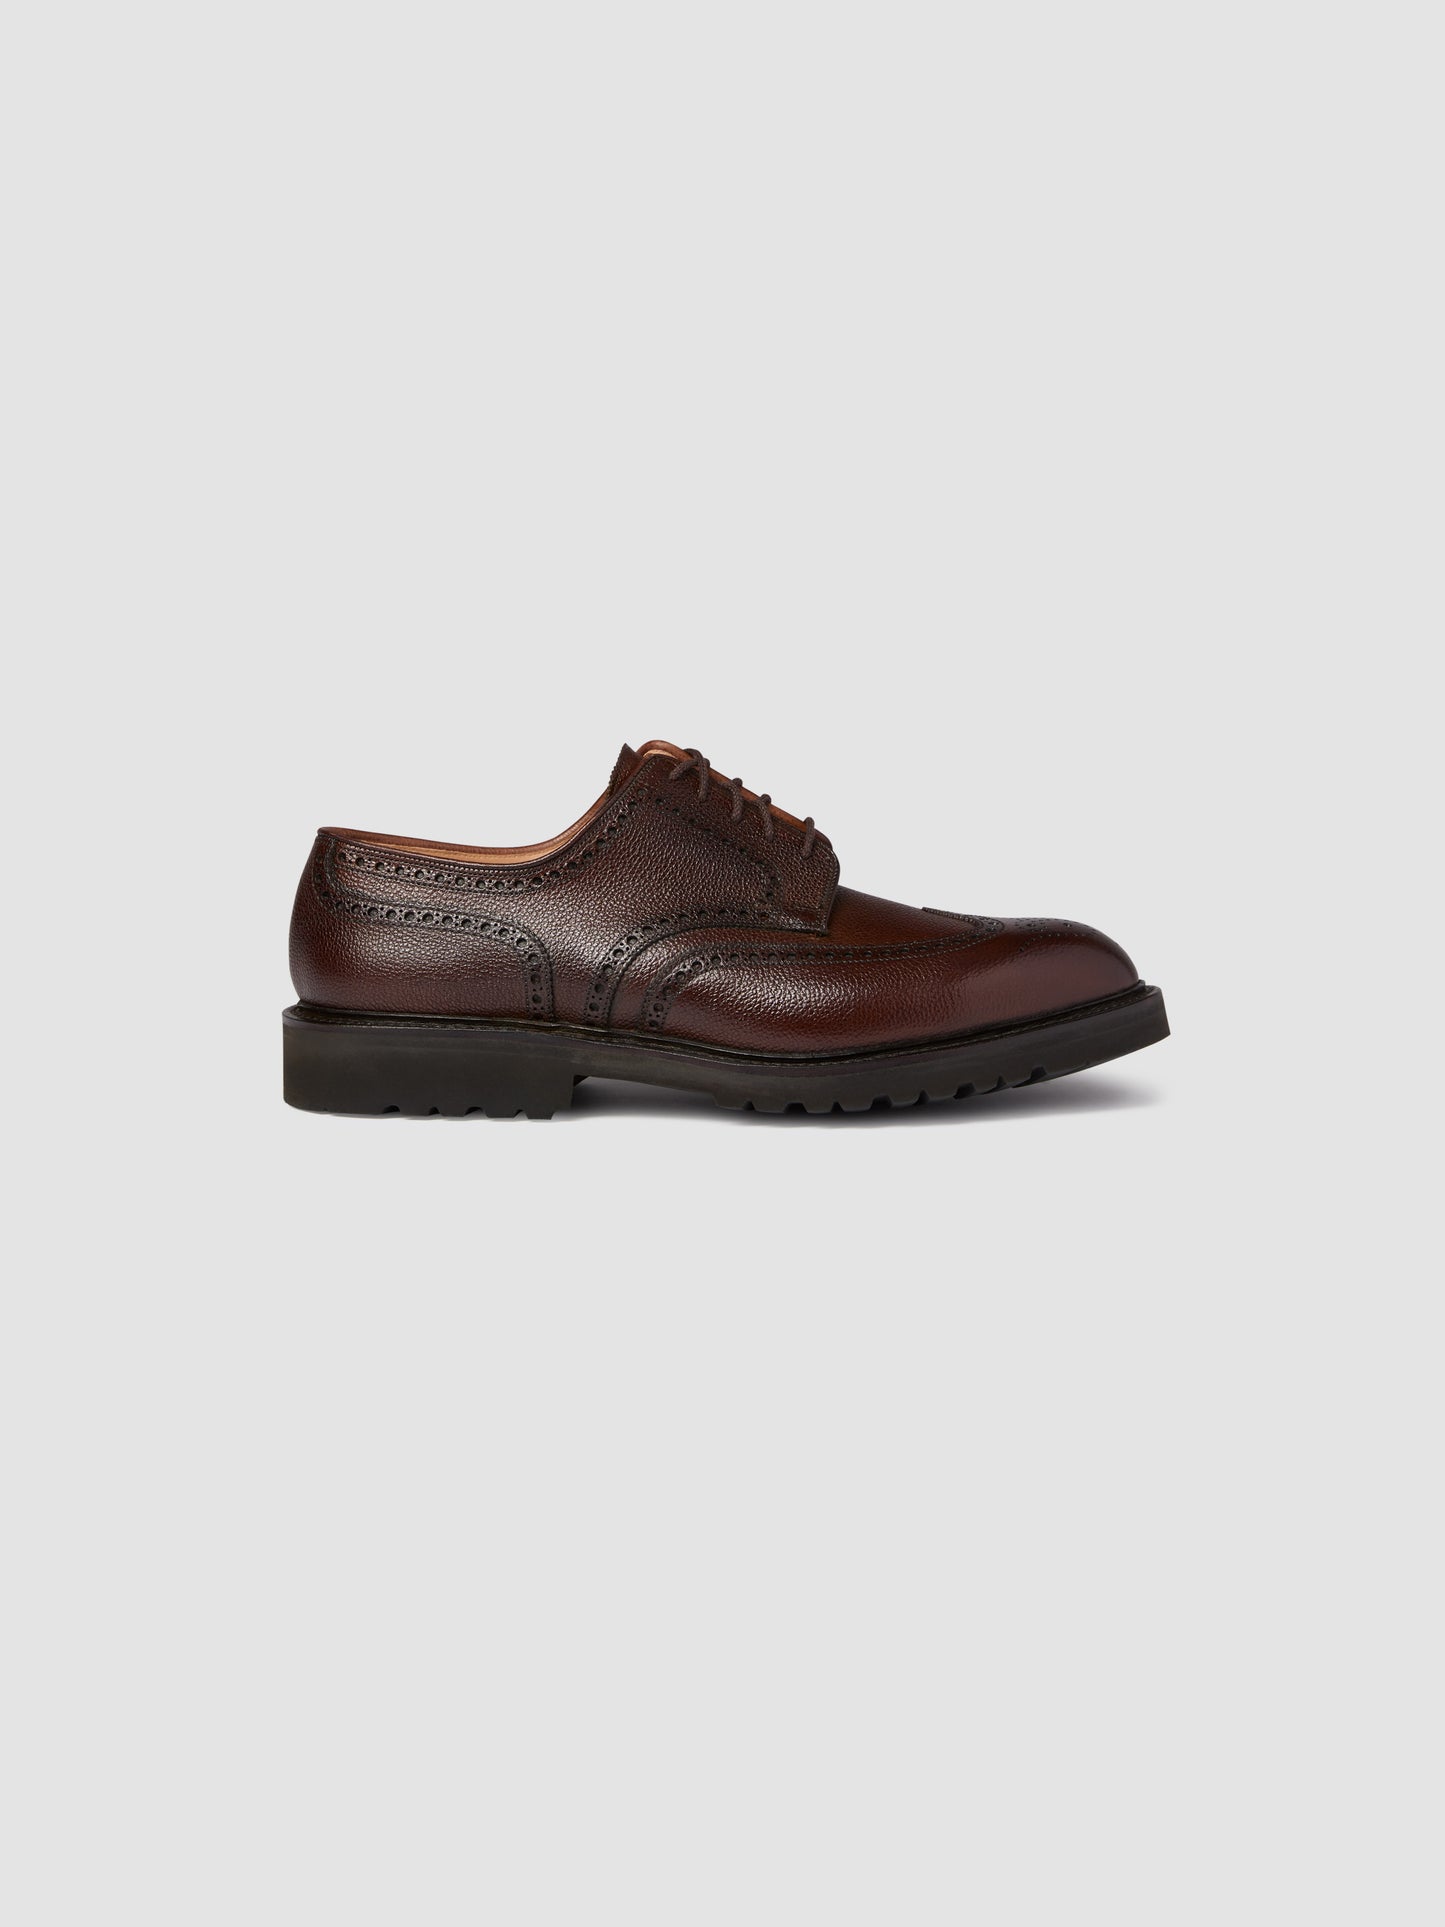 Pebble Grain Leather Brogue Shoes Product Side